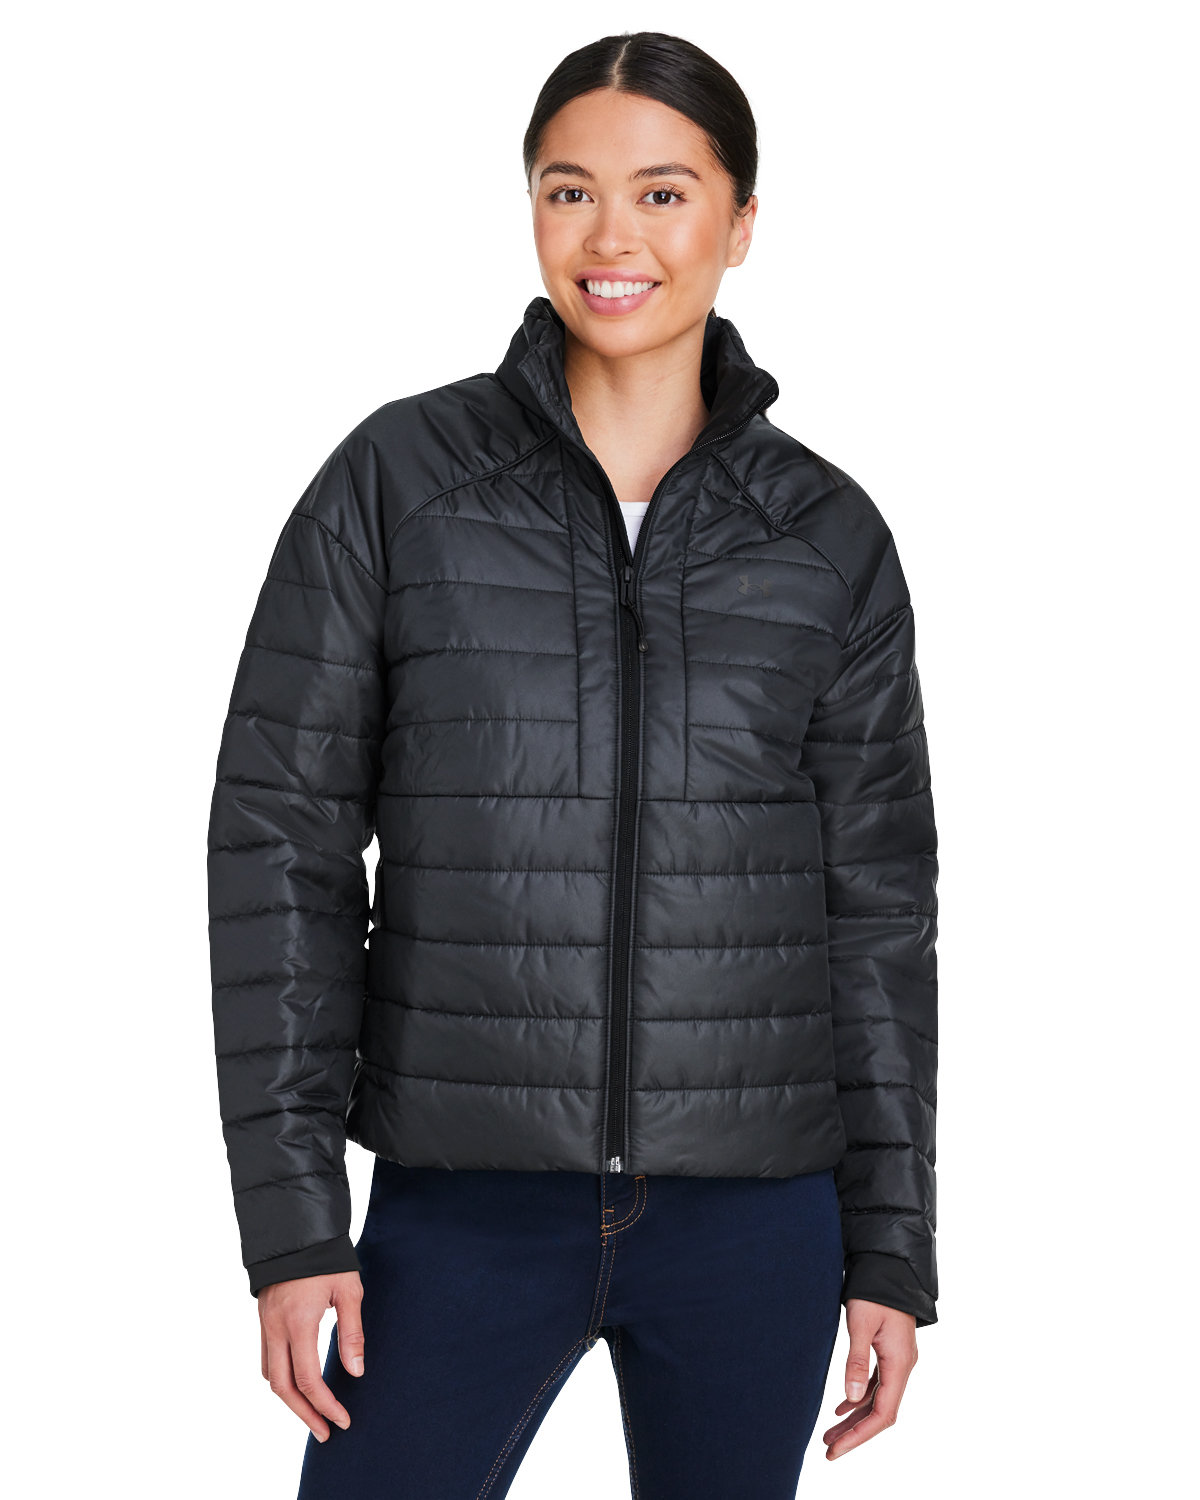 Ladies Storm Insulate Jacket-Under Armour